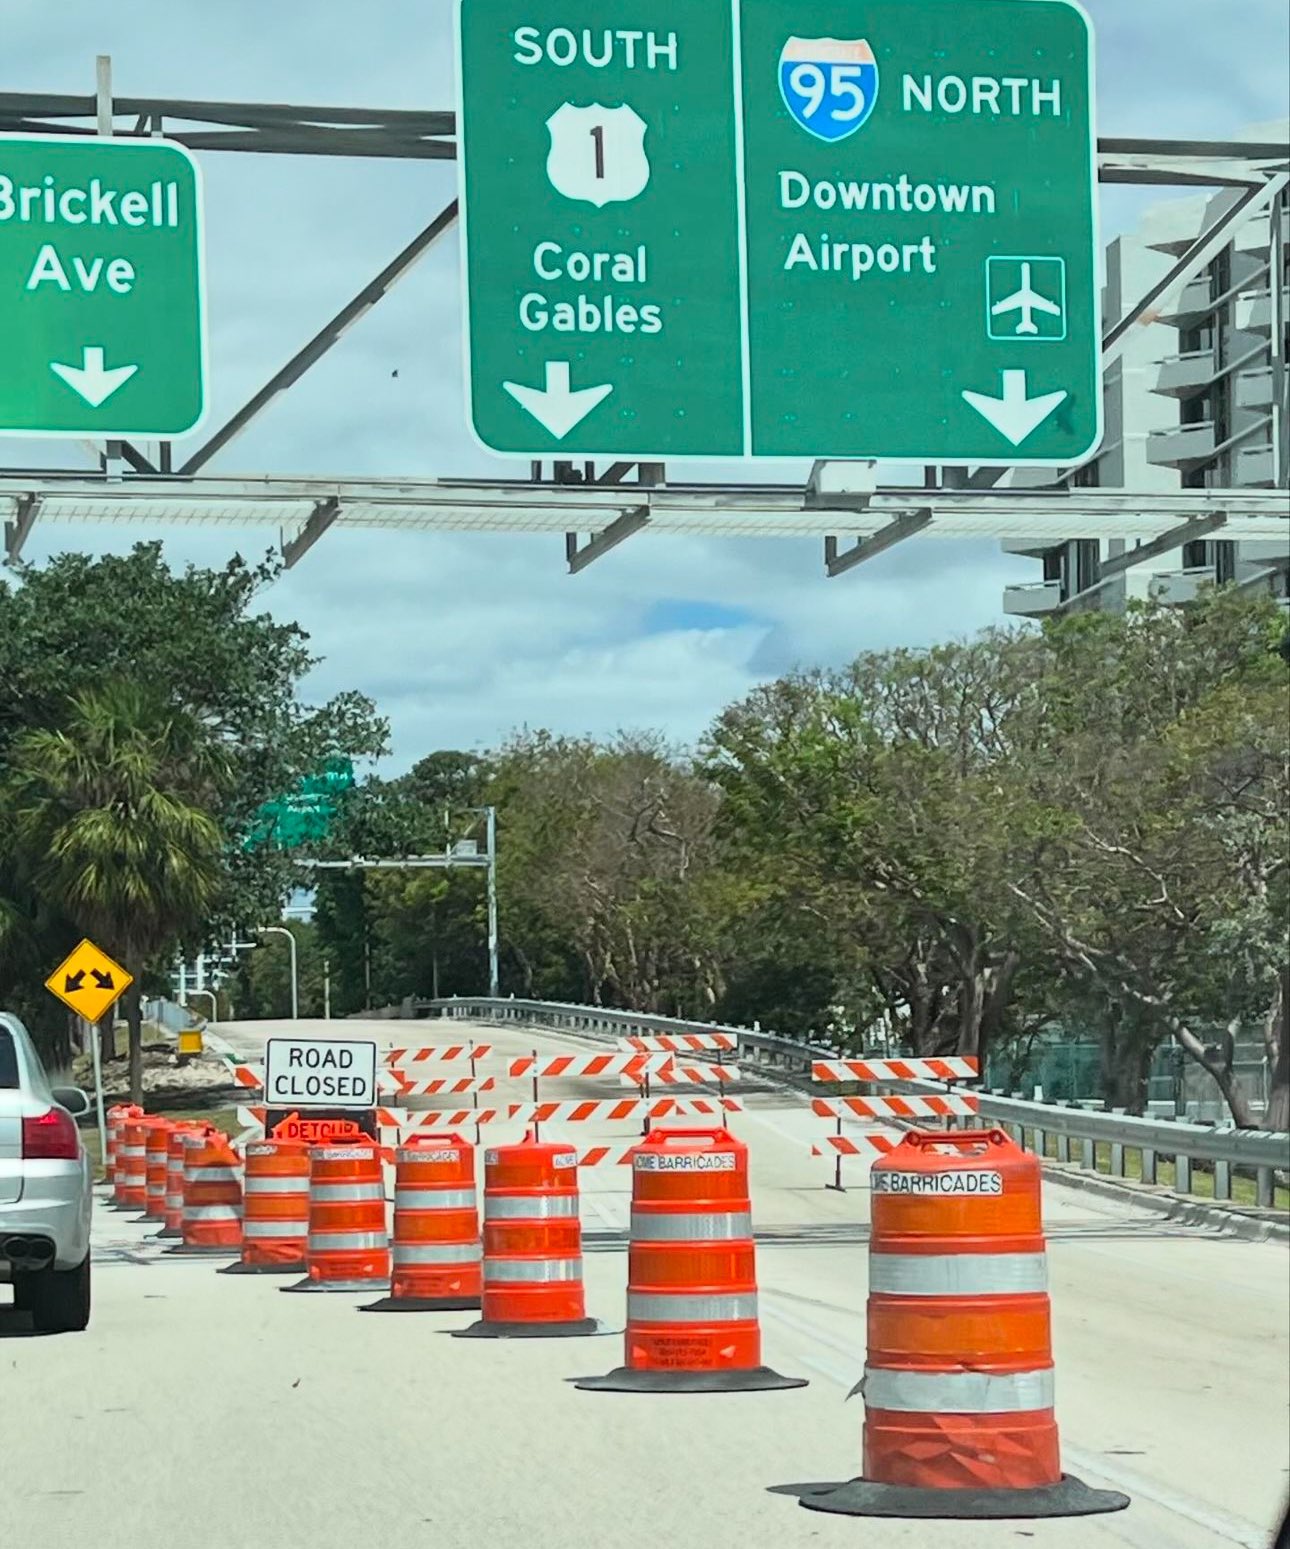 Total Traffic Miami  on X: "This closure is in effect now from Key  Biscayne back to the mainland. https://t.co/EH4UBn8tjJ" / X